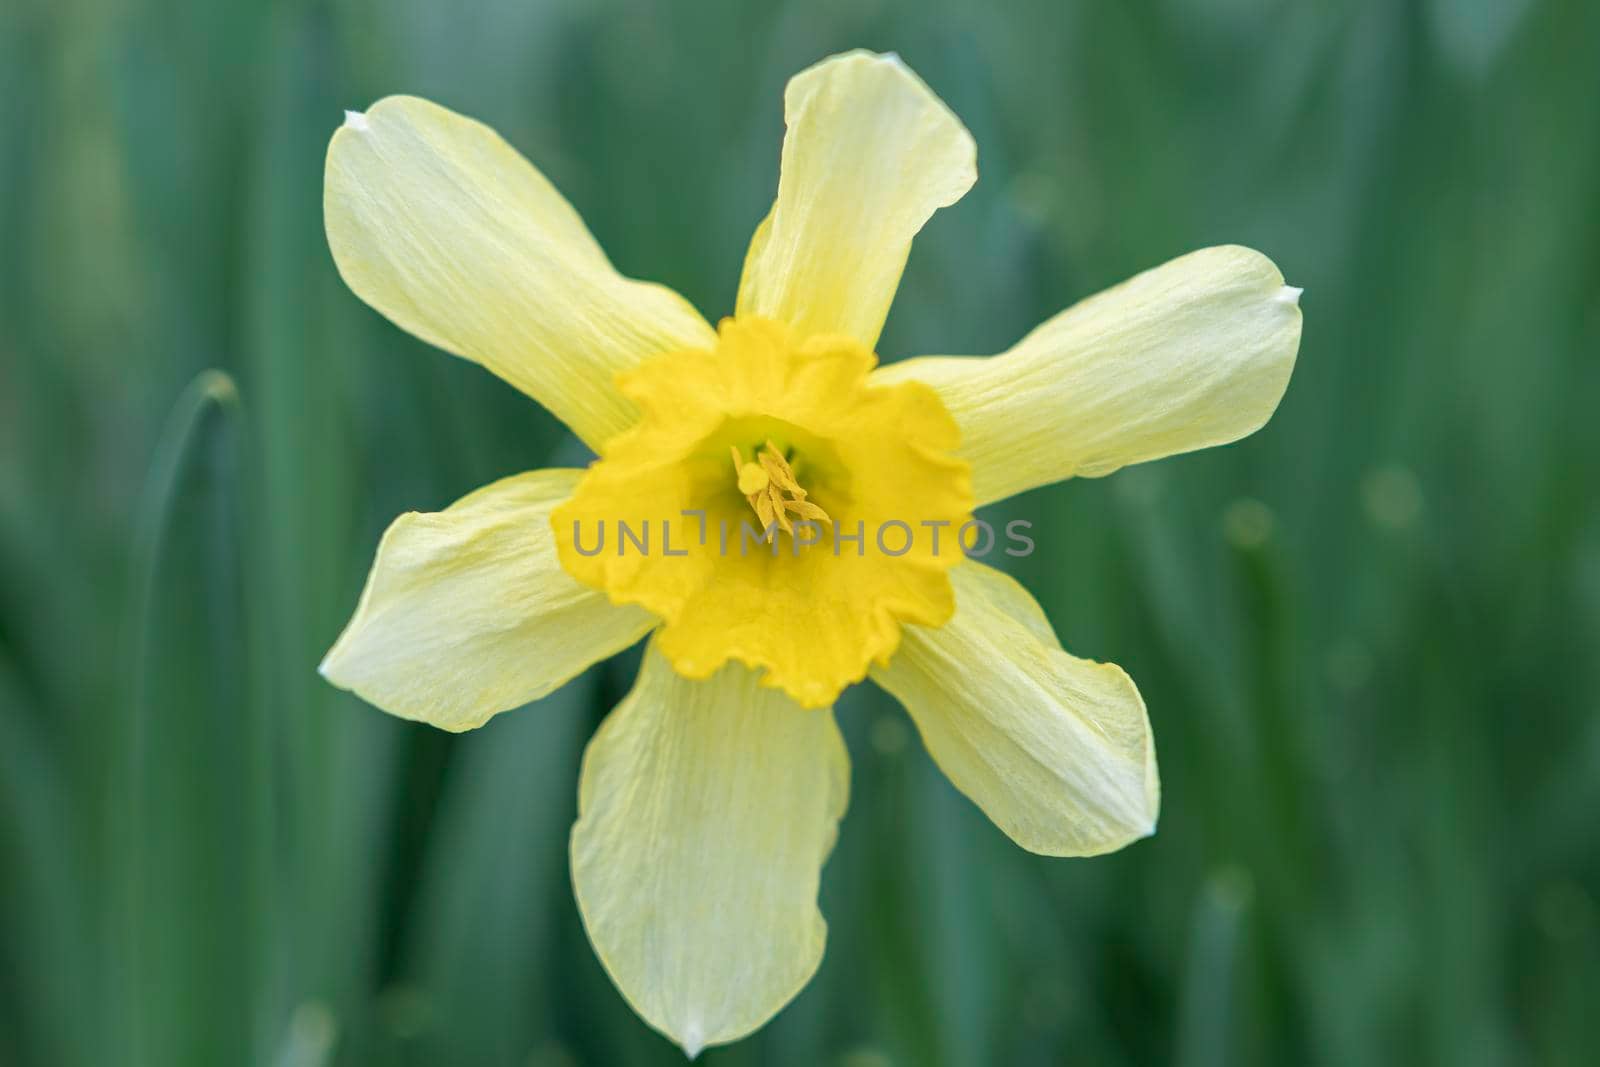 narcissus flower on a green background close-up by roman112007